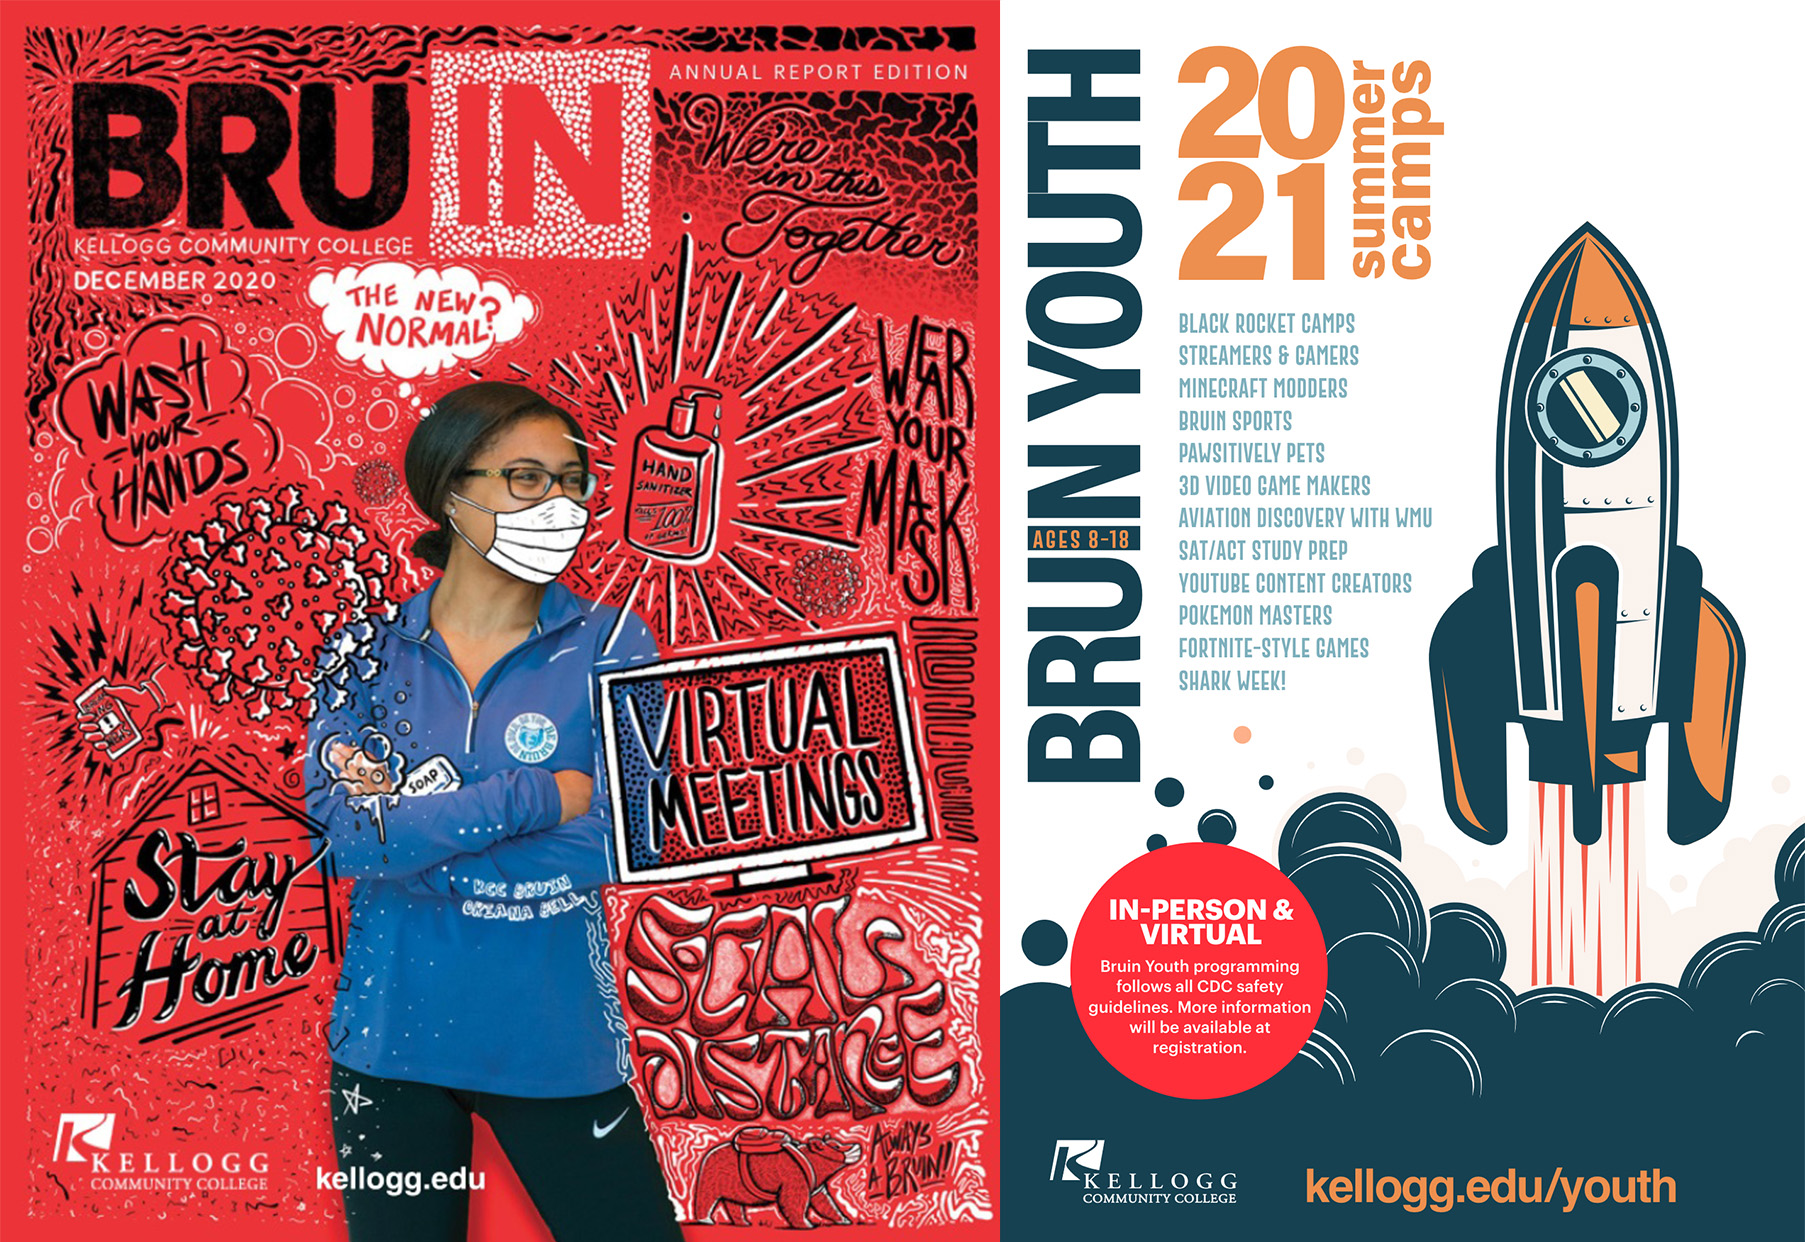 The award-winning BruIN magazine and Bruin Youth schedule covers.